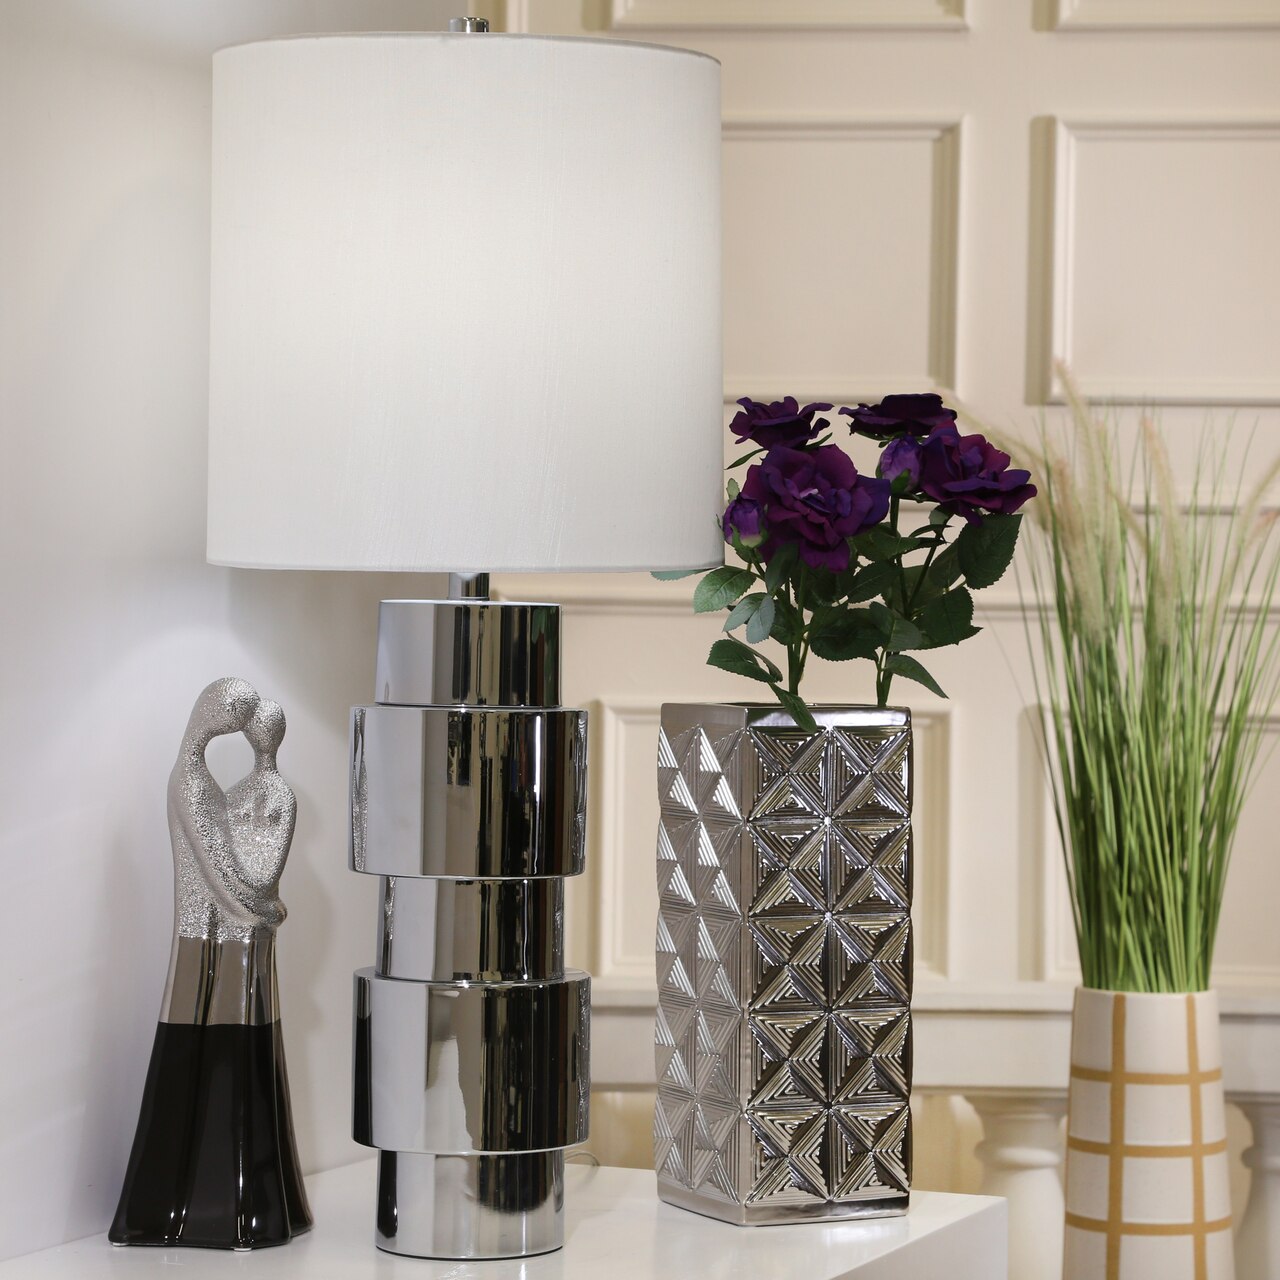 Stacked Cyclinder Table Lamp - Silver